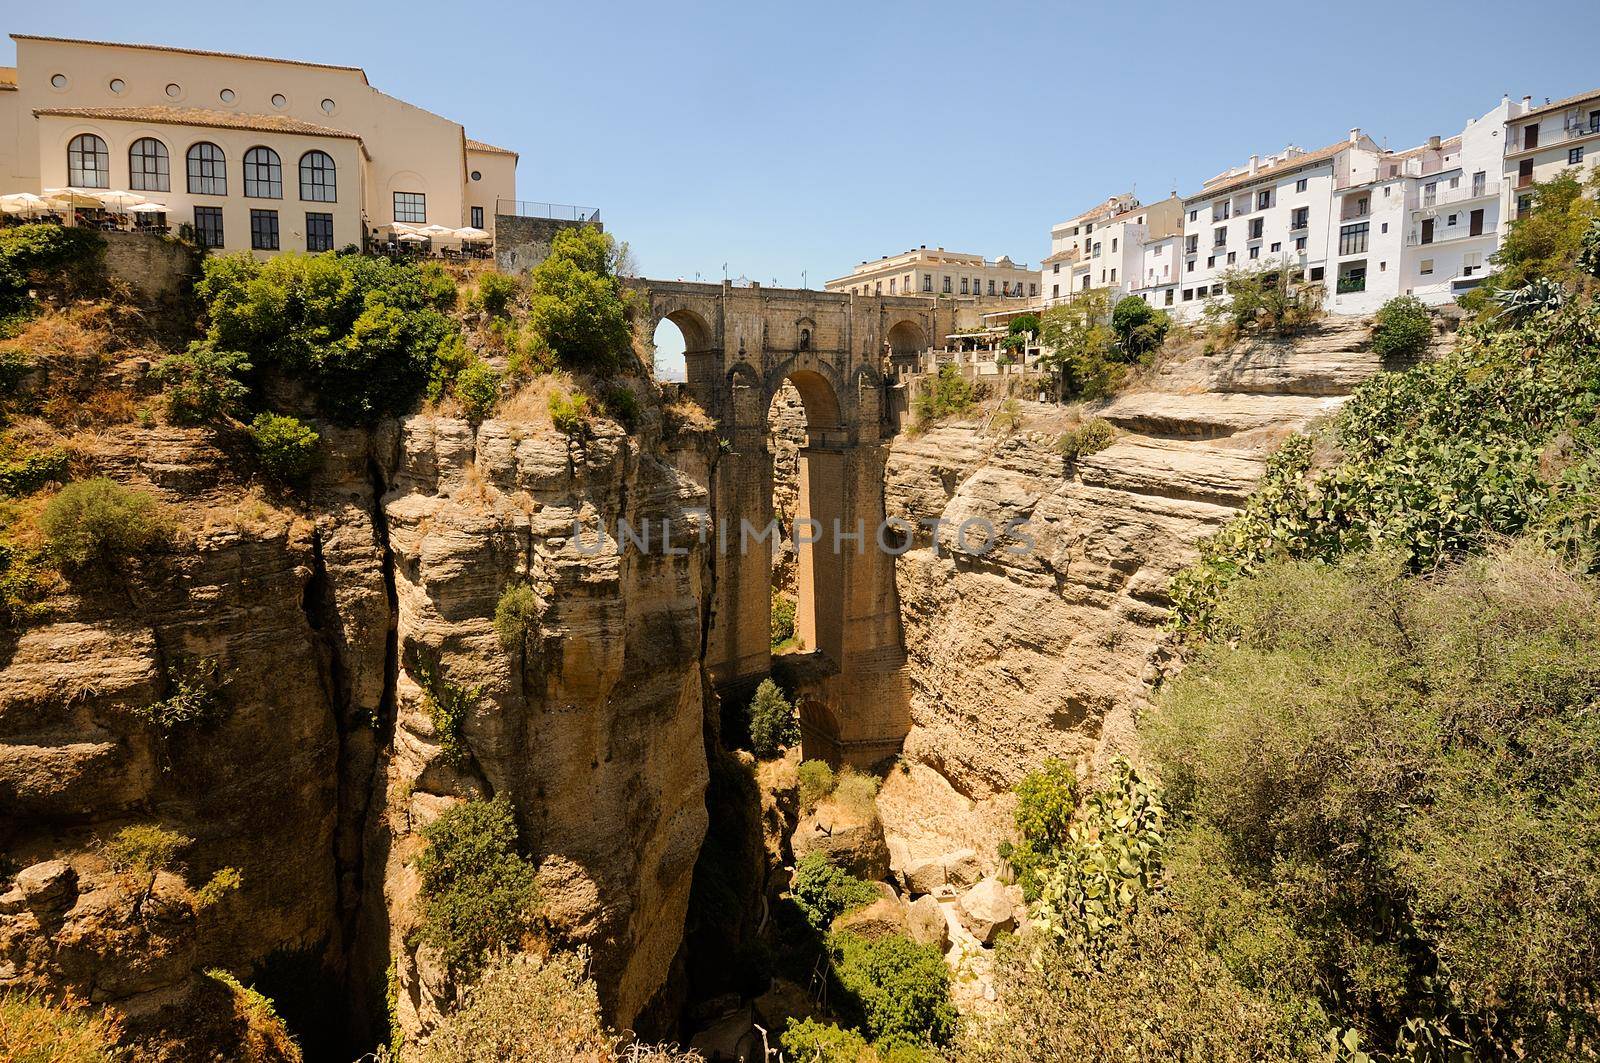 New bridge in Ronda, one of the famous white villages in M laga, Andalusia, Spain